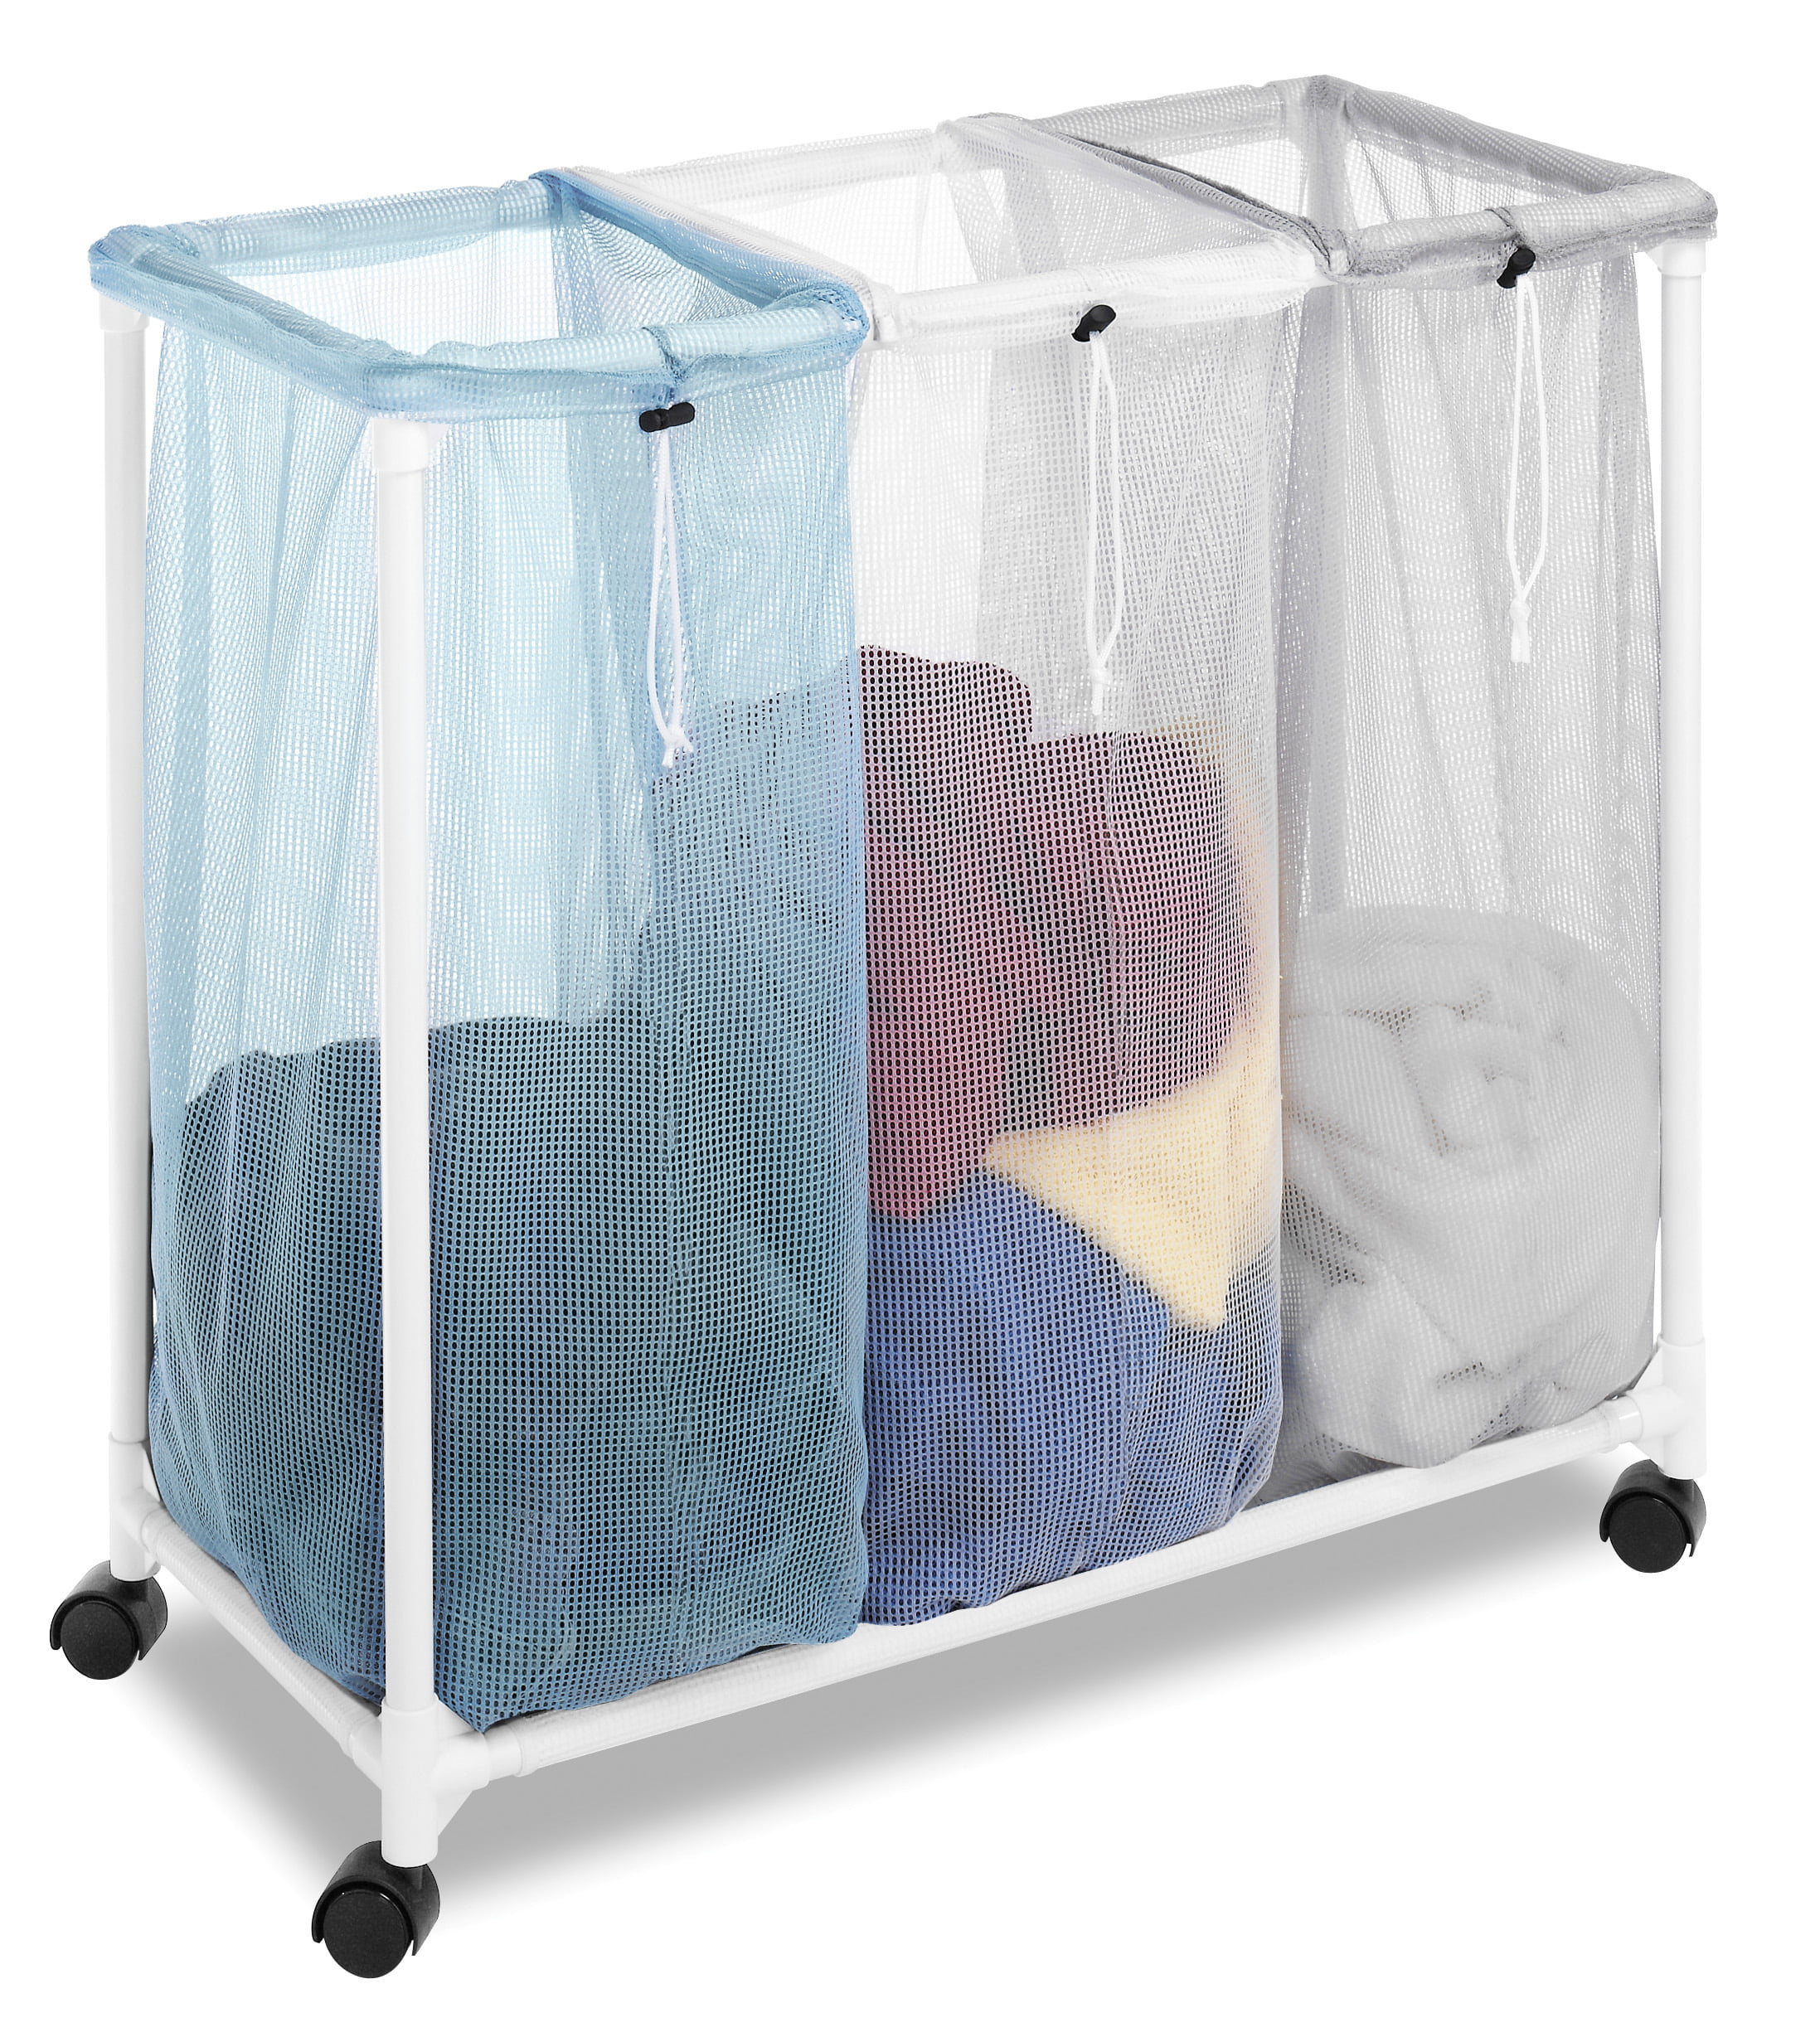 Whitmor Classic Style Mesh Laundry Hamper 24" x 36" Storm Blue Color A102 